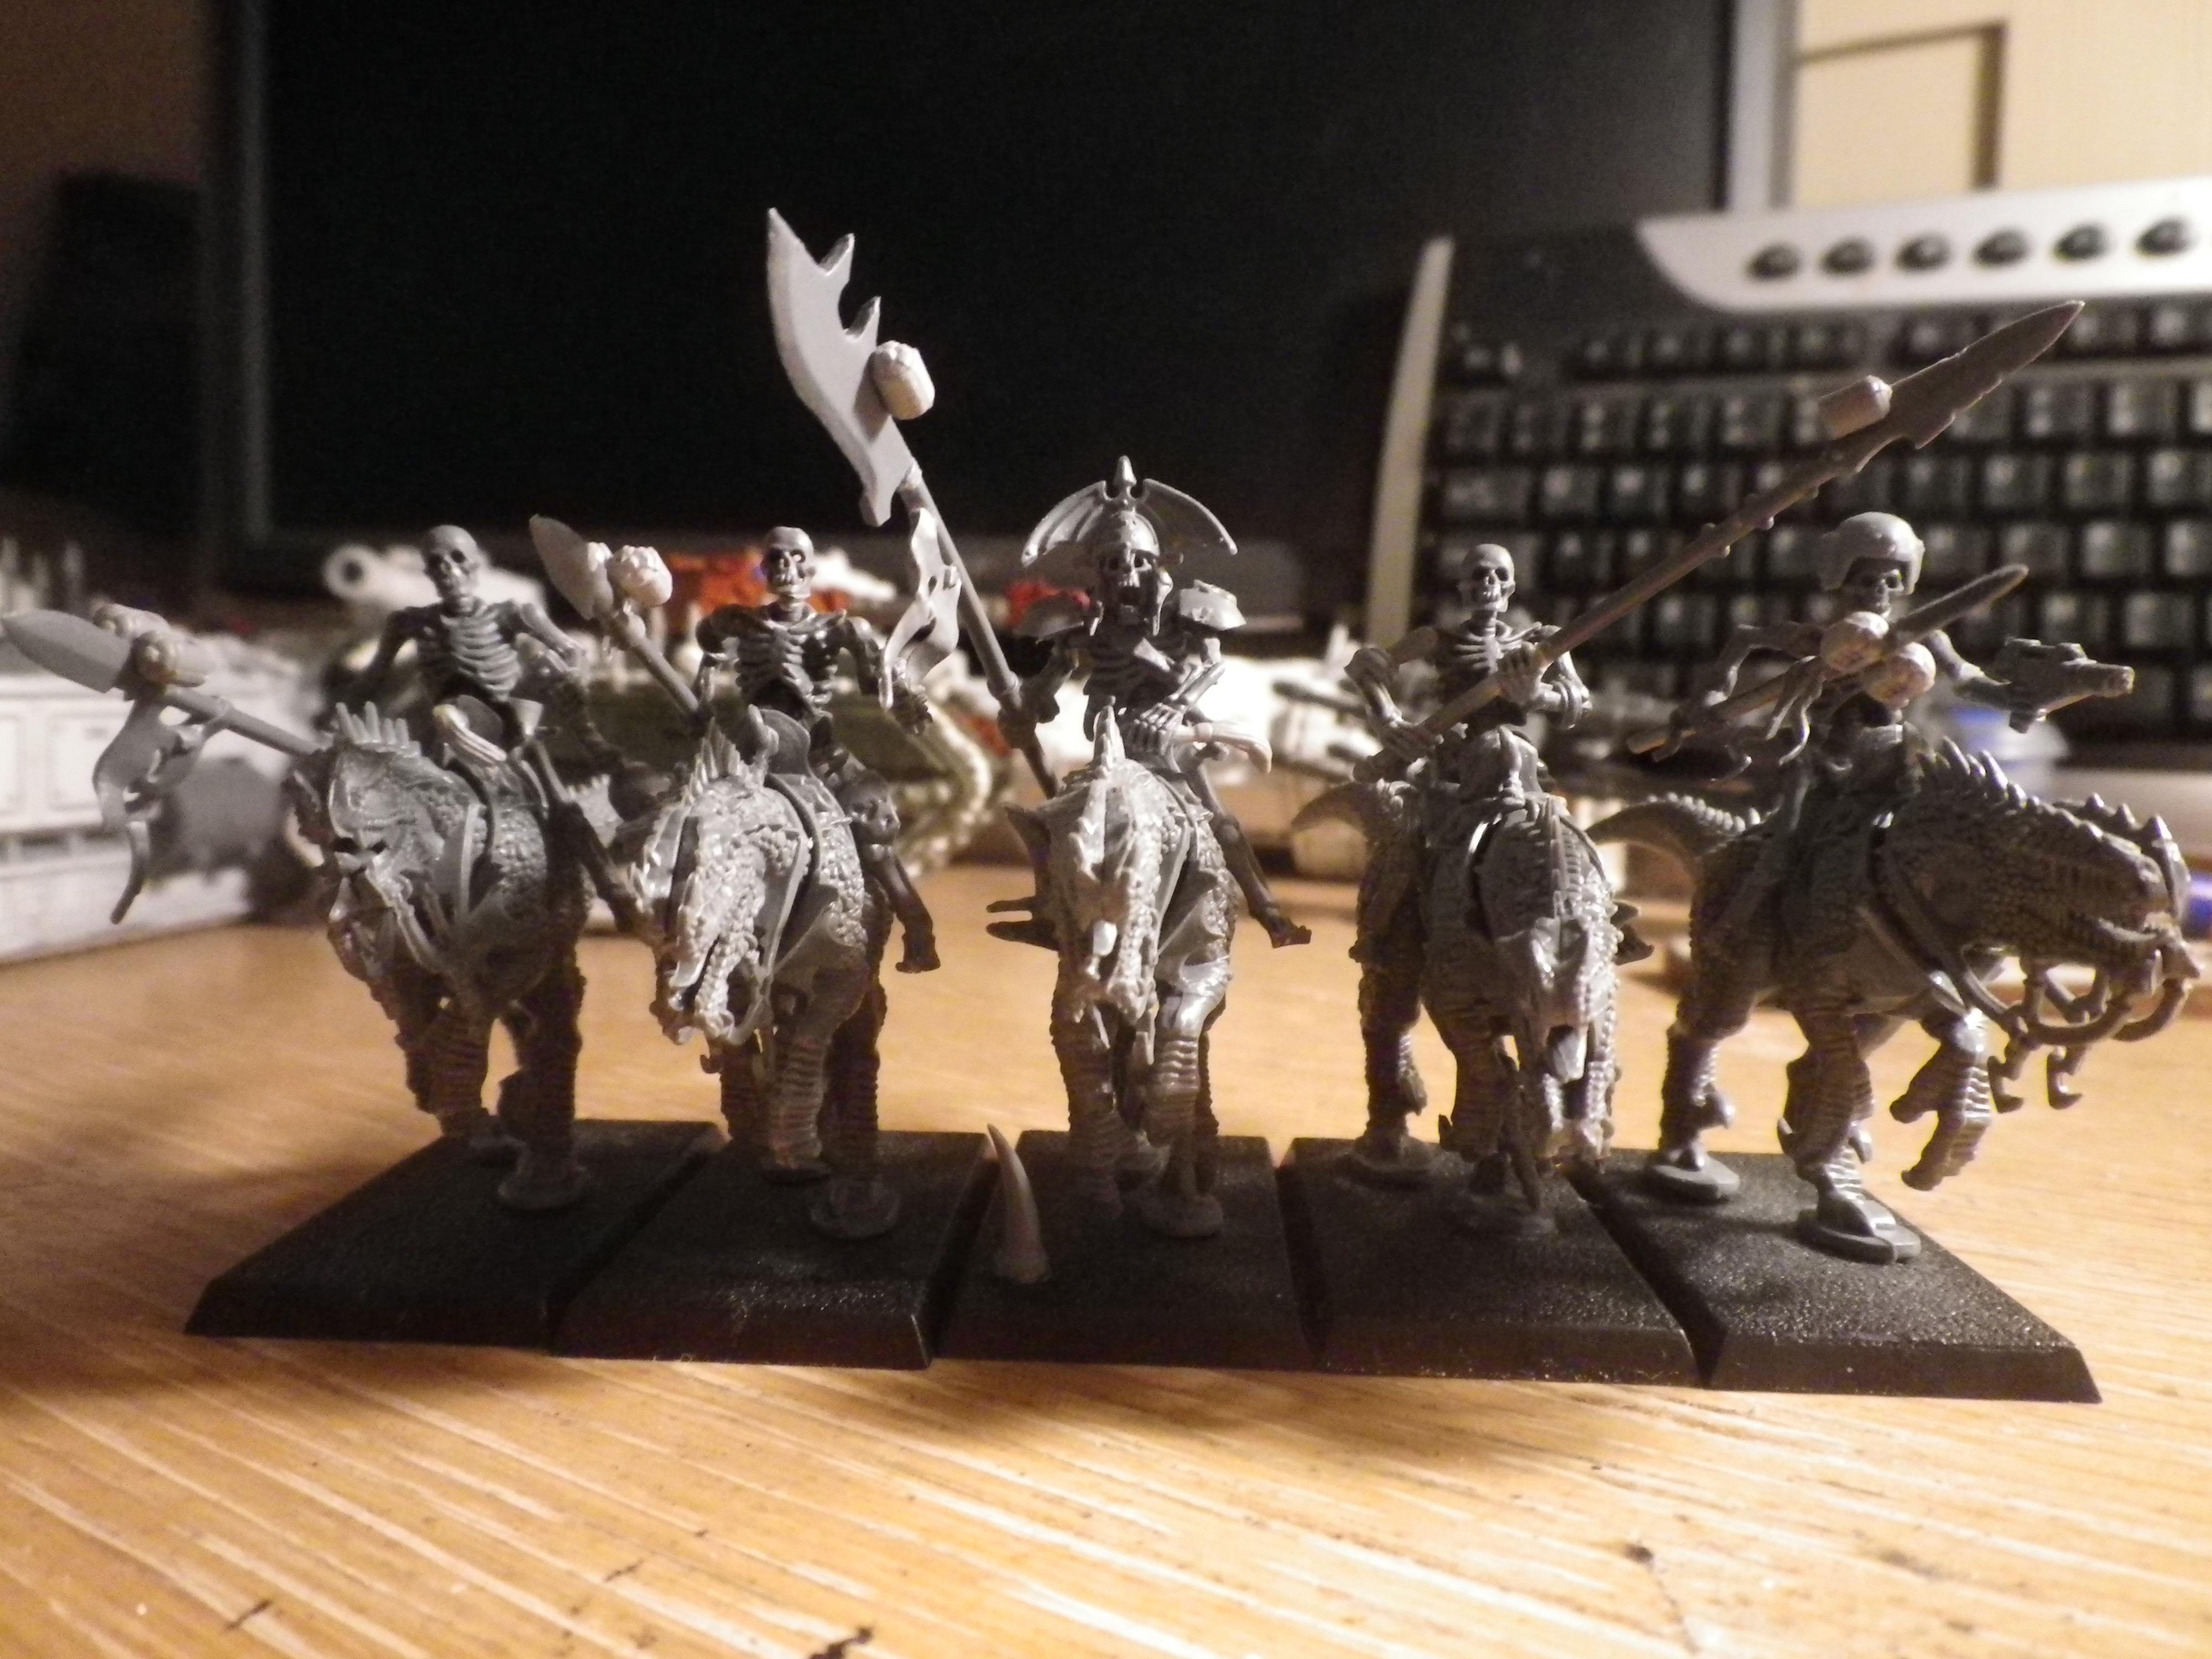 227th, Chaos Guard, Guard, Imperial, Imperial Guard, Rough Riders, Svog, Undead